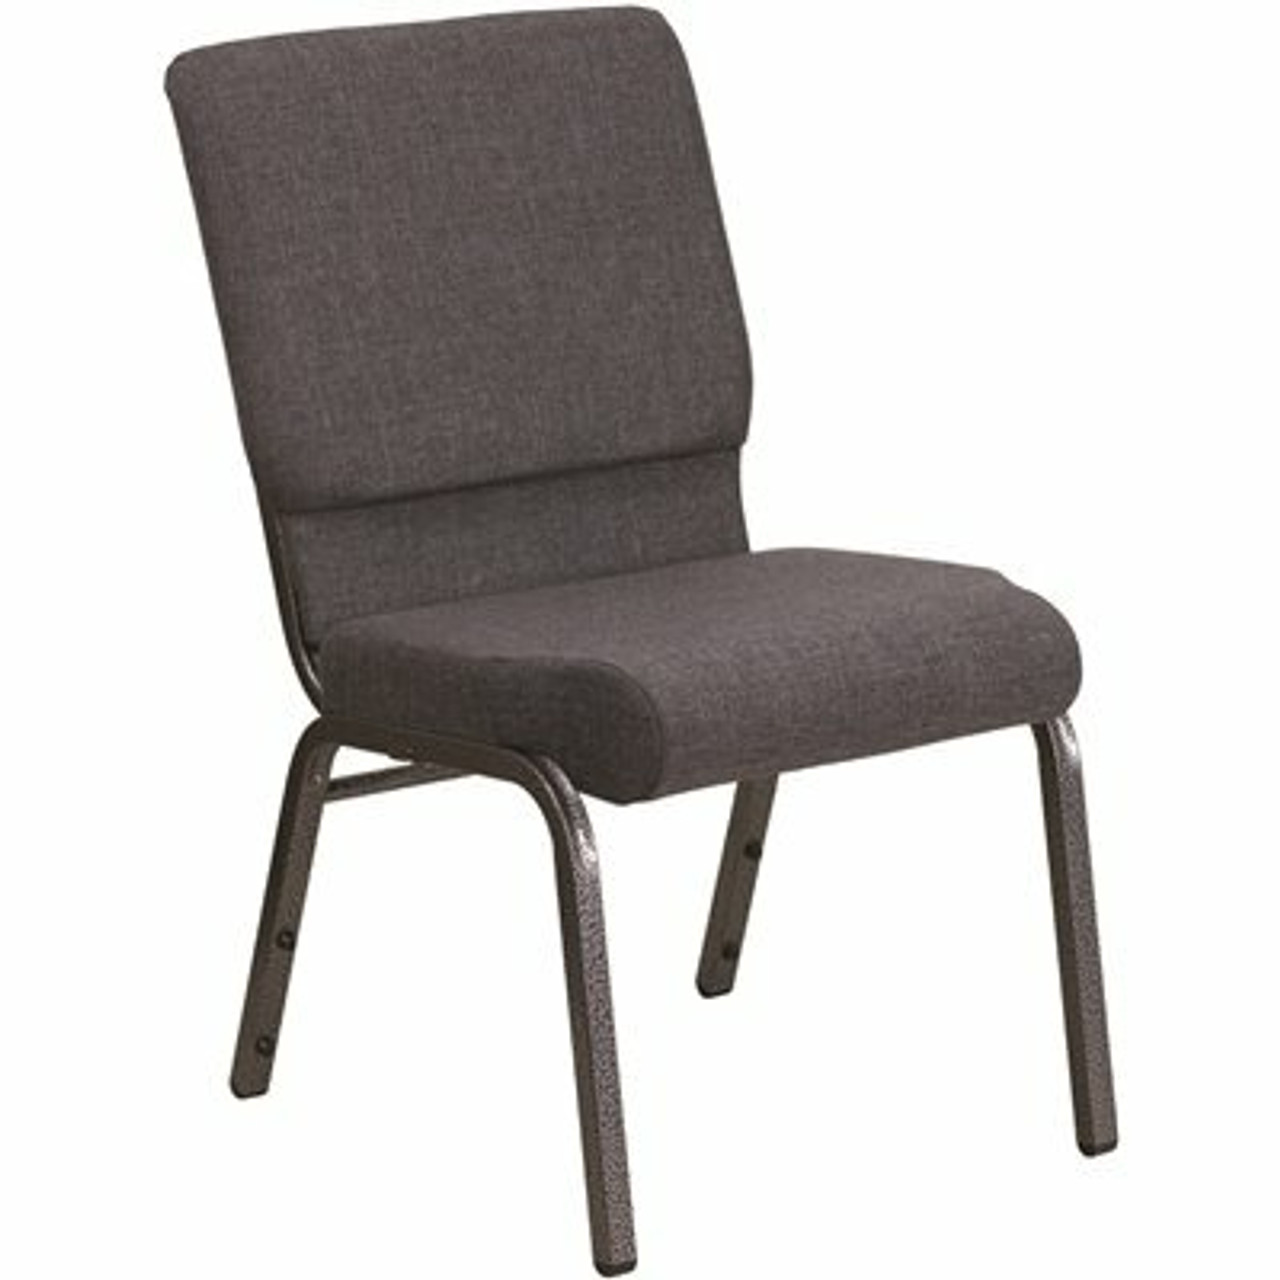 Carnegy Avenue Dark Gray Fabric/Silver Vein Frame Stack Chair - 309321263